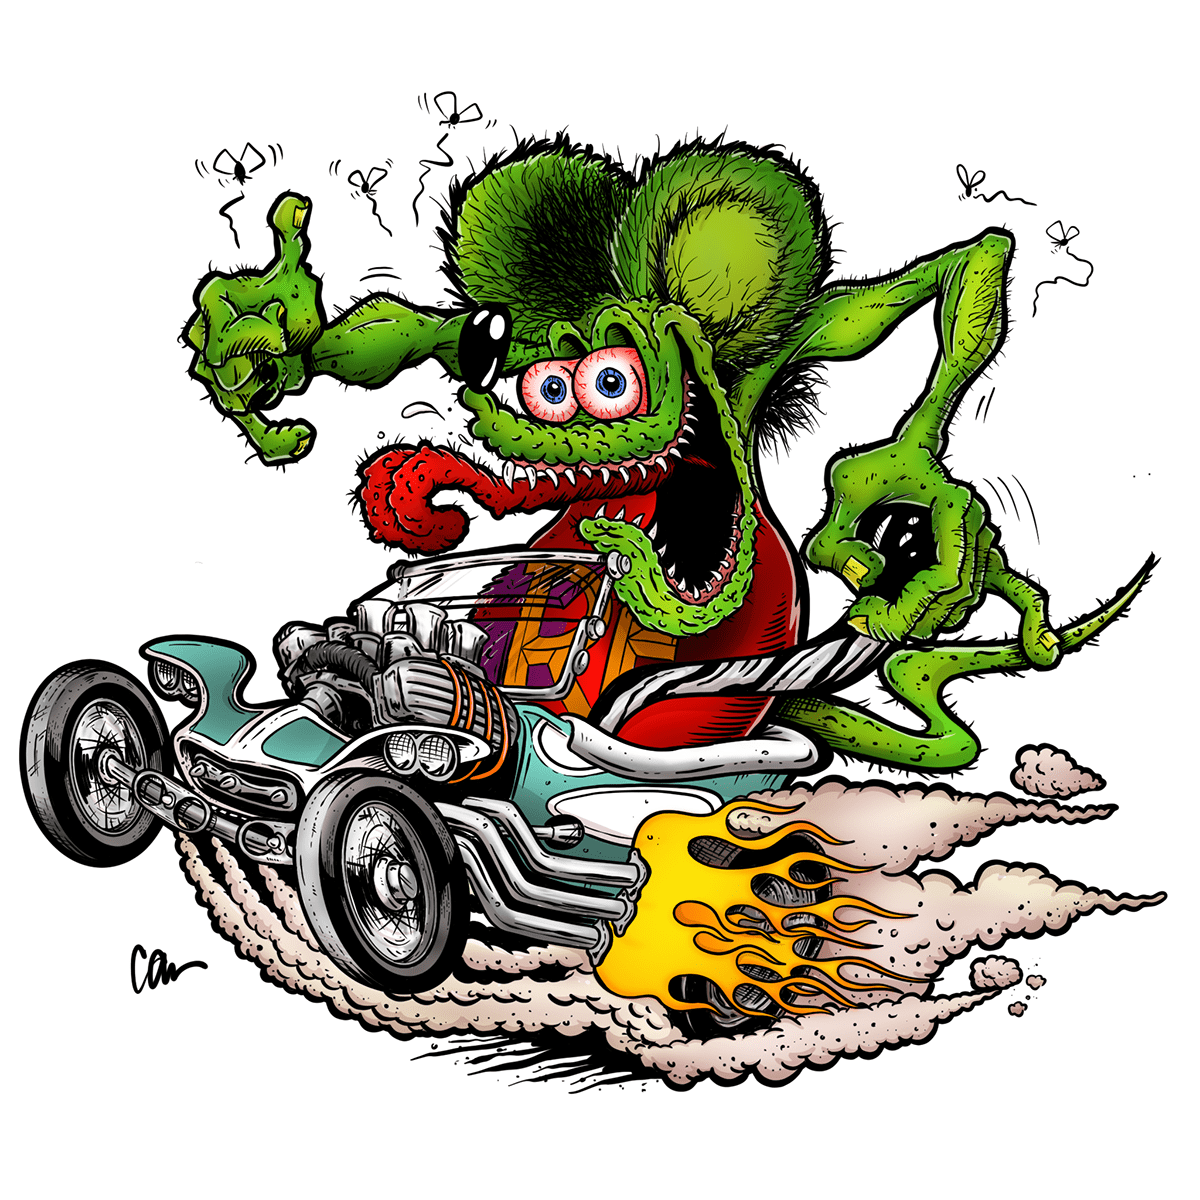 Rat Fink, the outlaw.